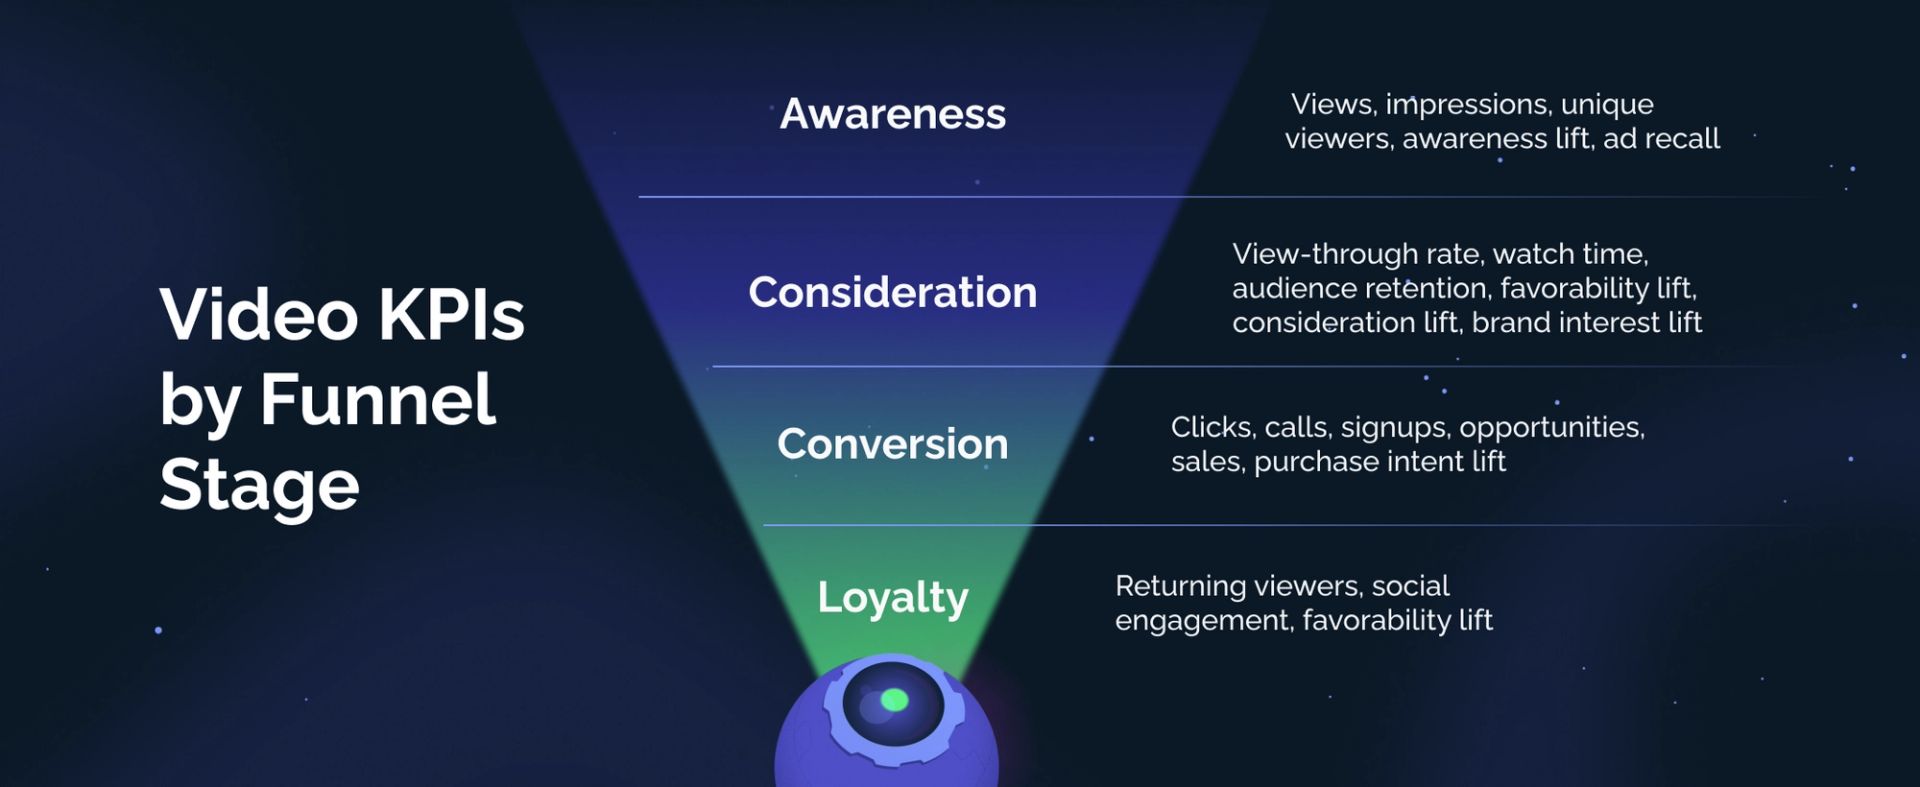 Video KPIs by funnel stage